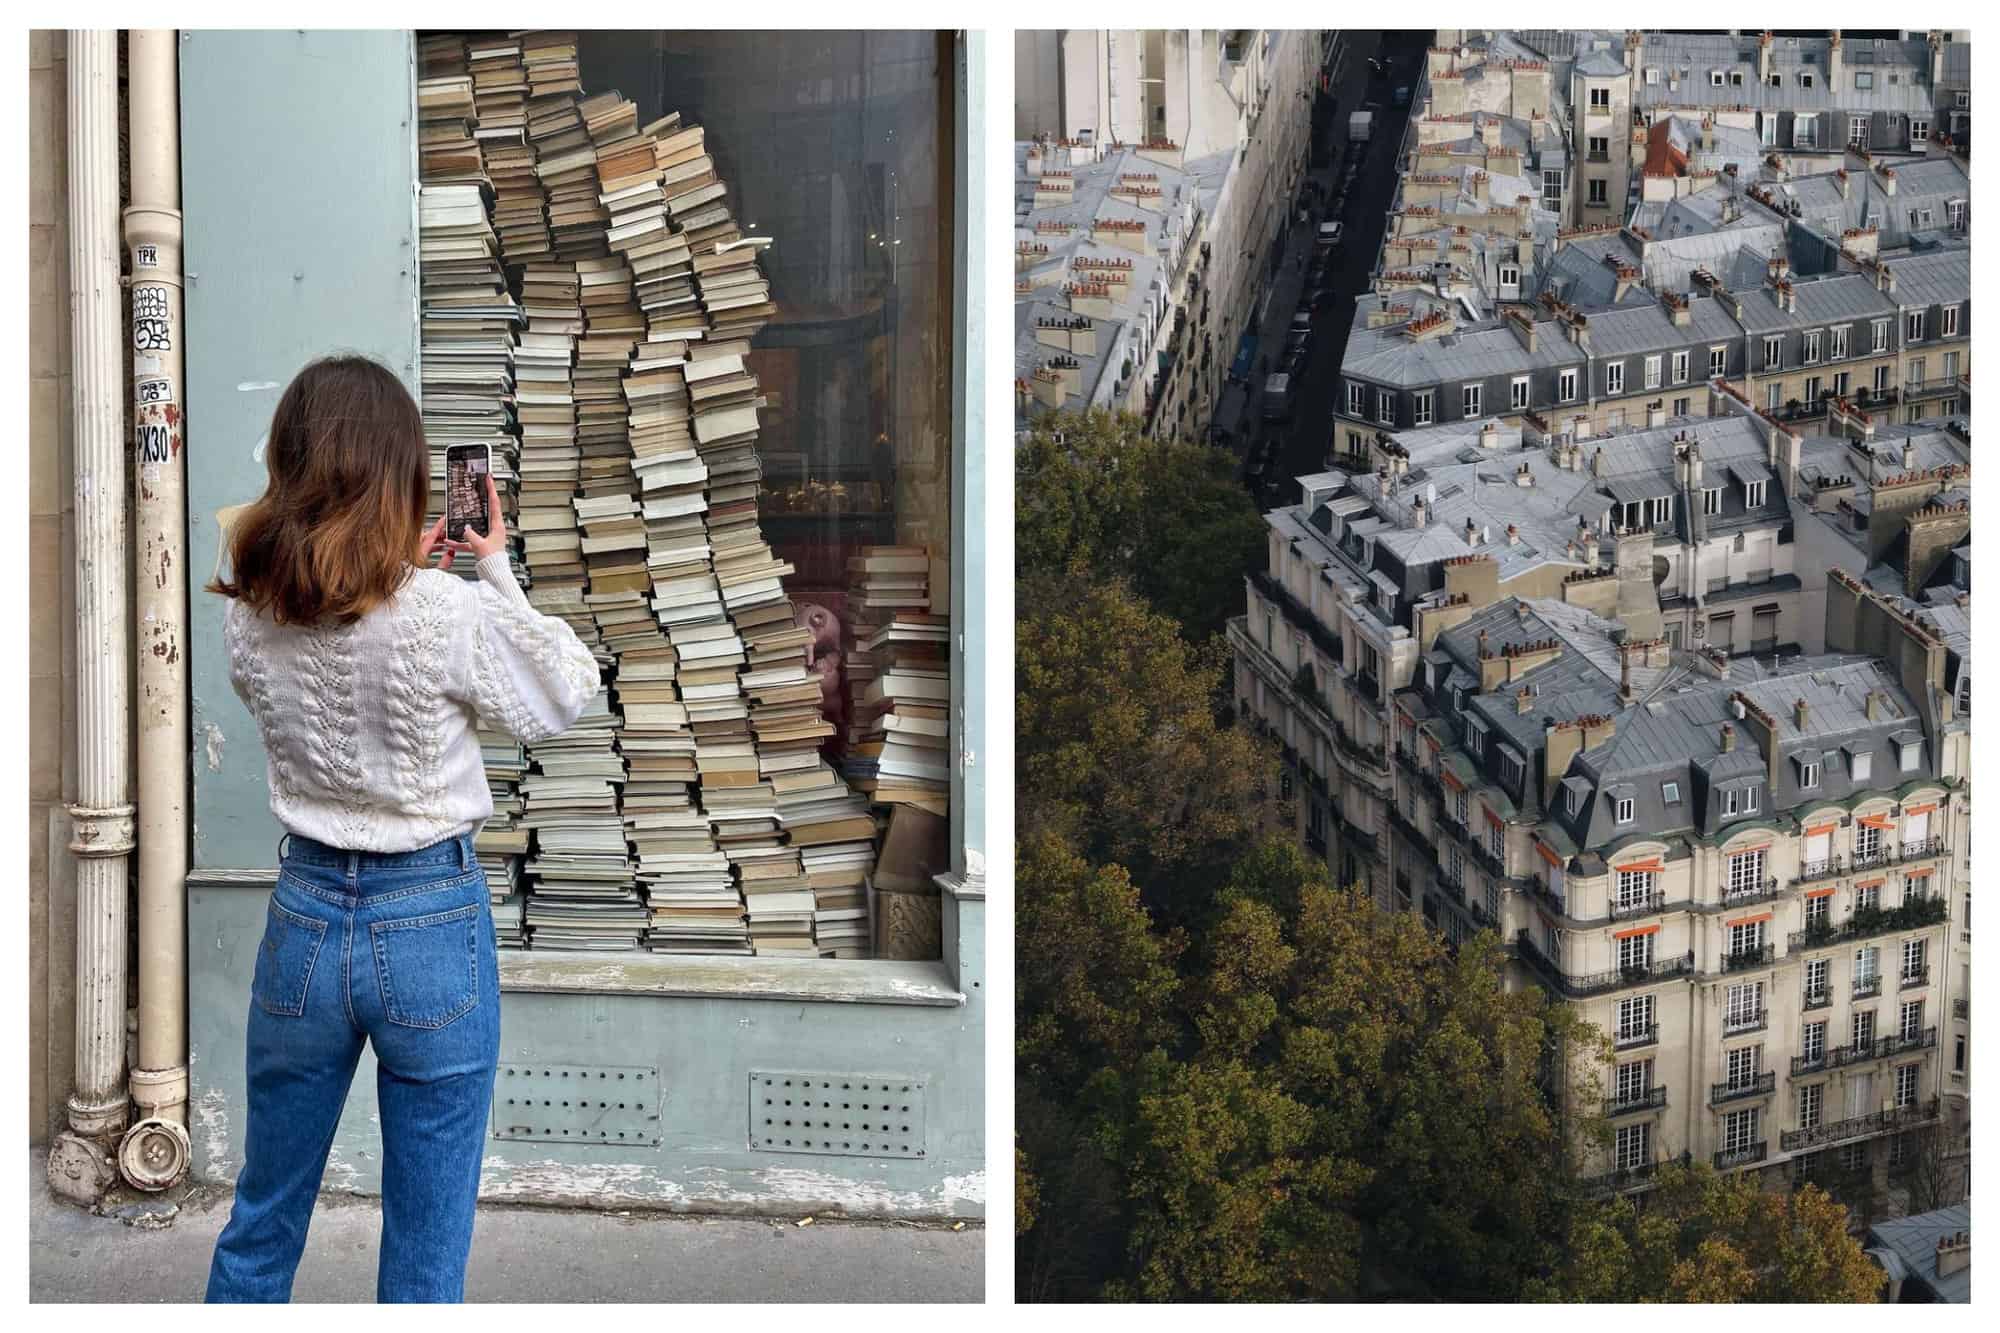 Left-A woman stands photographing a window filled with books. She wears jeans and a white sweater. 
Right- Trees and rooftops of Paris are shown.